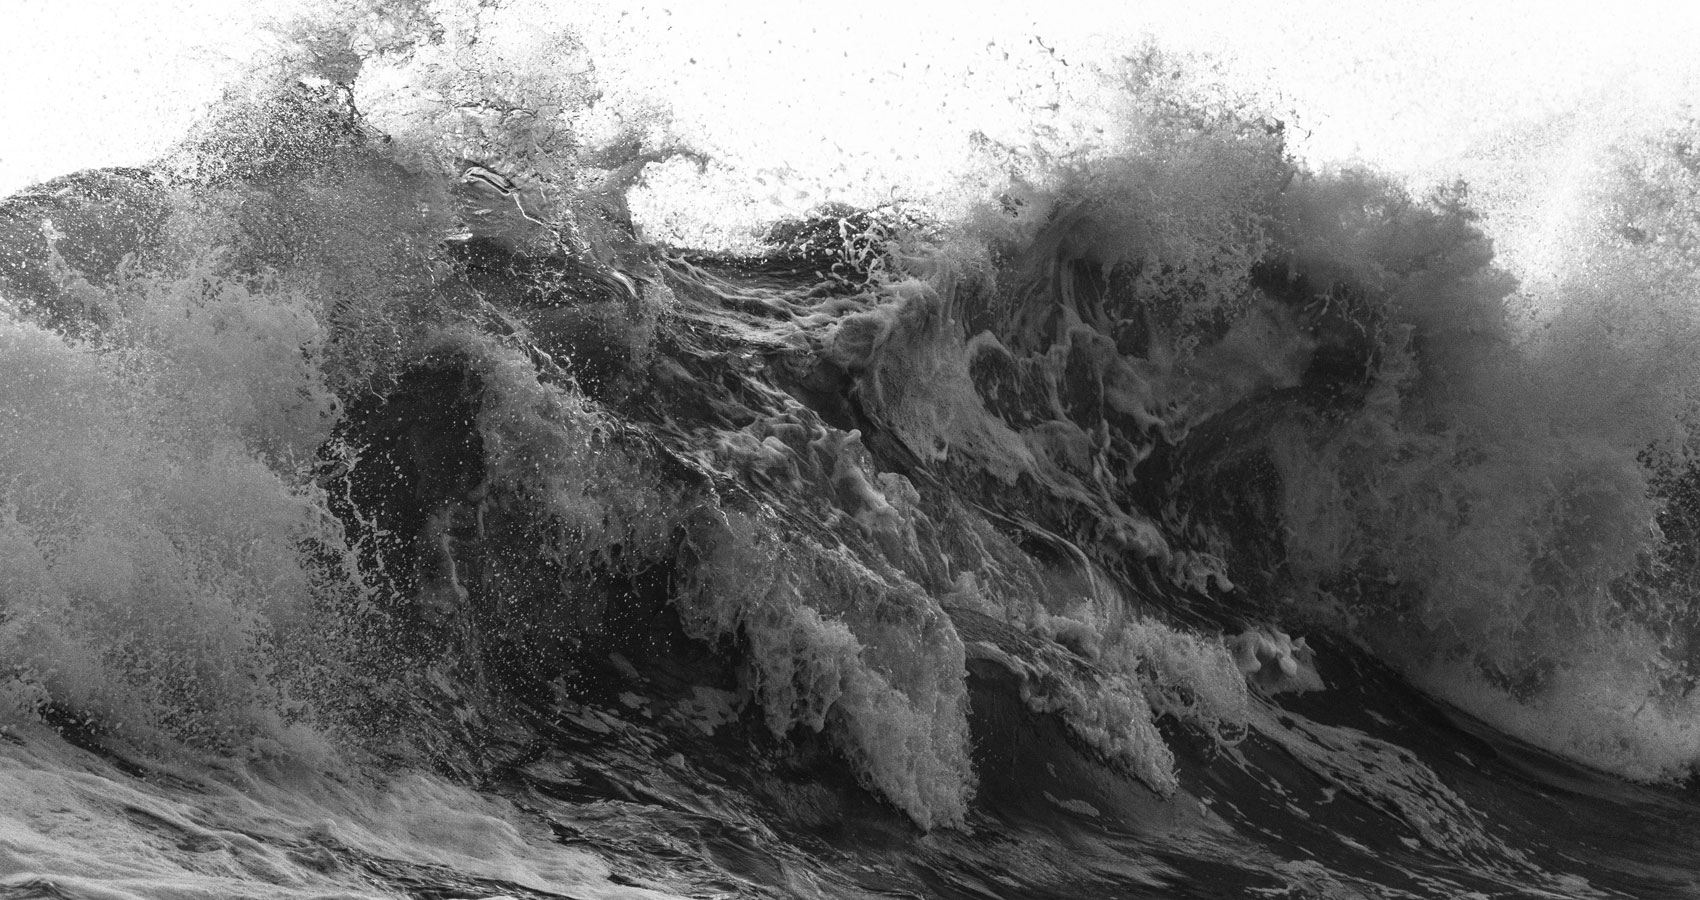 Tsunami, a poem written by Ricky Hawthorne at Spillwords.com